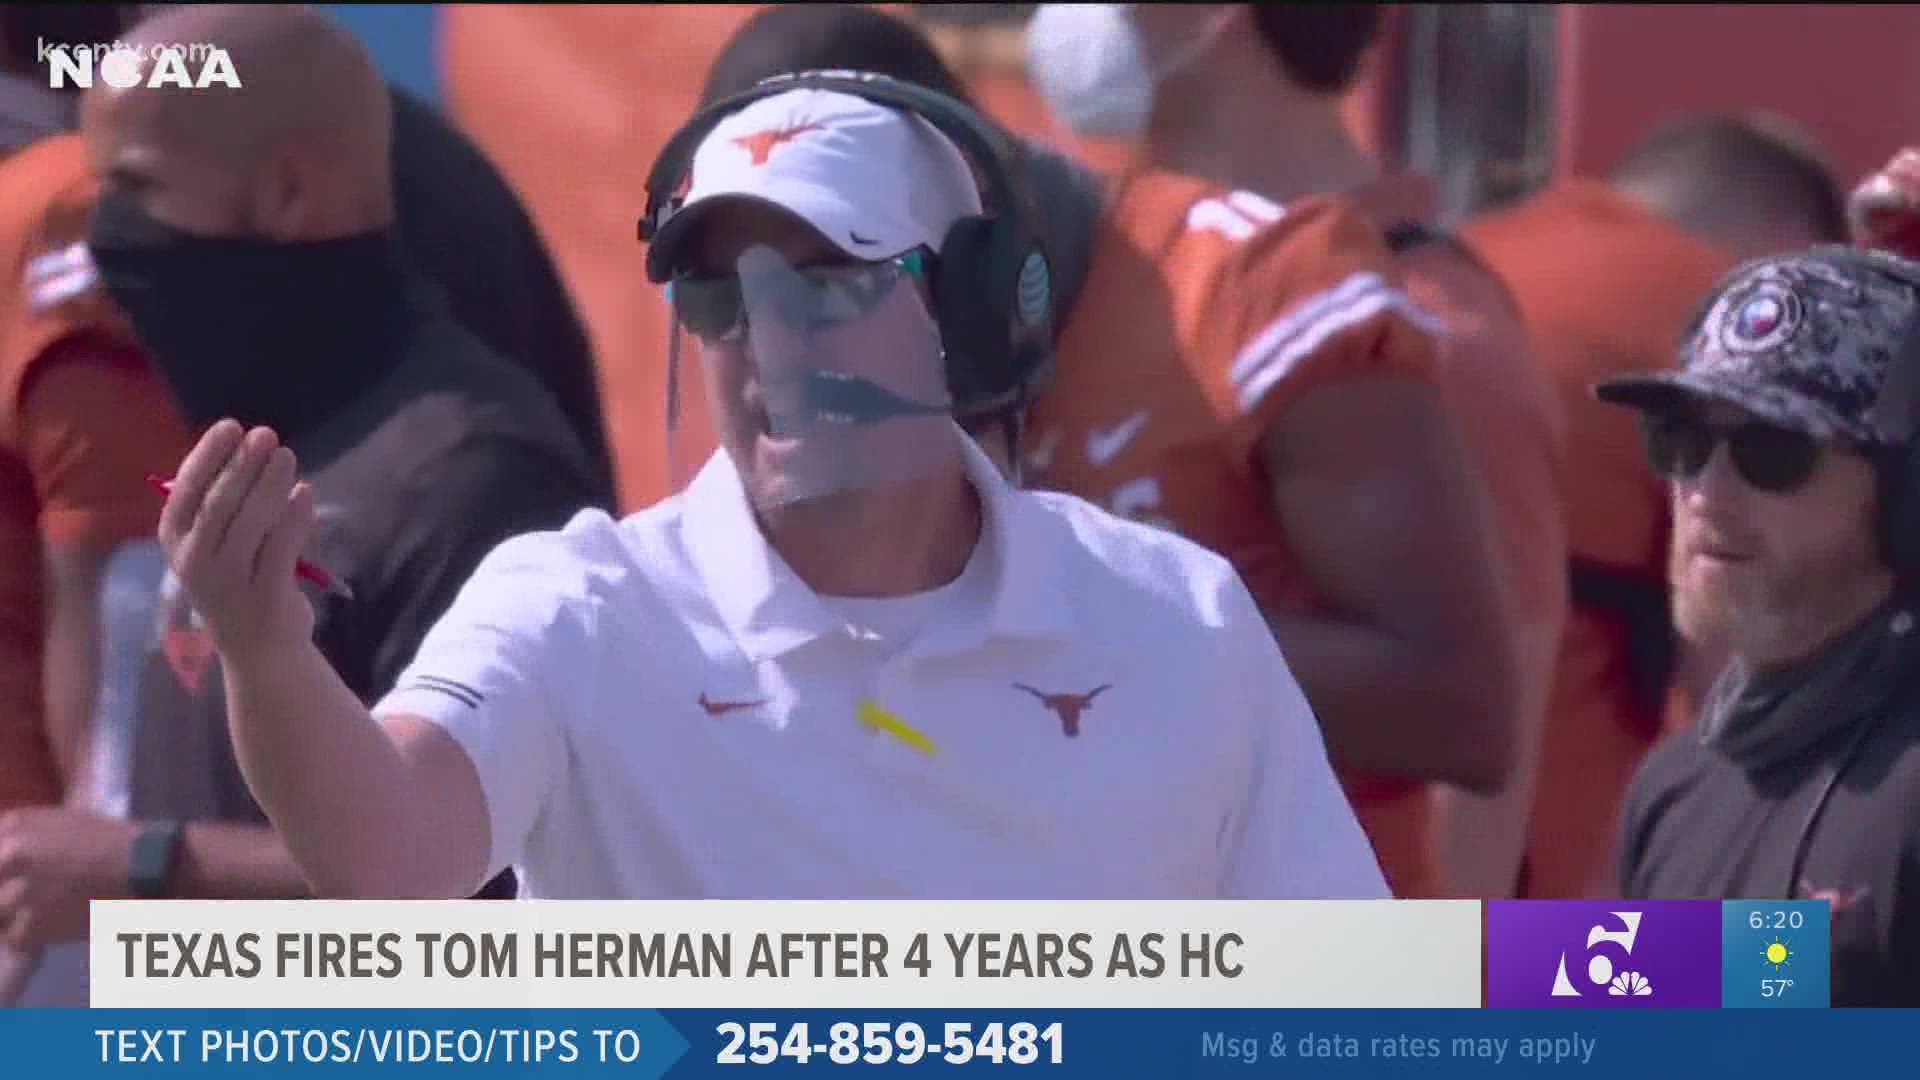 Tom Herman is out after four seasons with UT. Steve Sarkisian, Alabama offensive coordinator, has been hired as the new head coach.